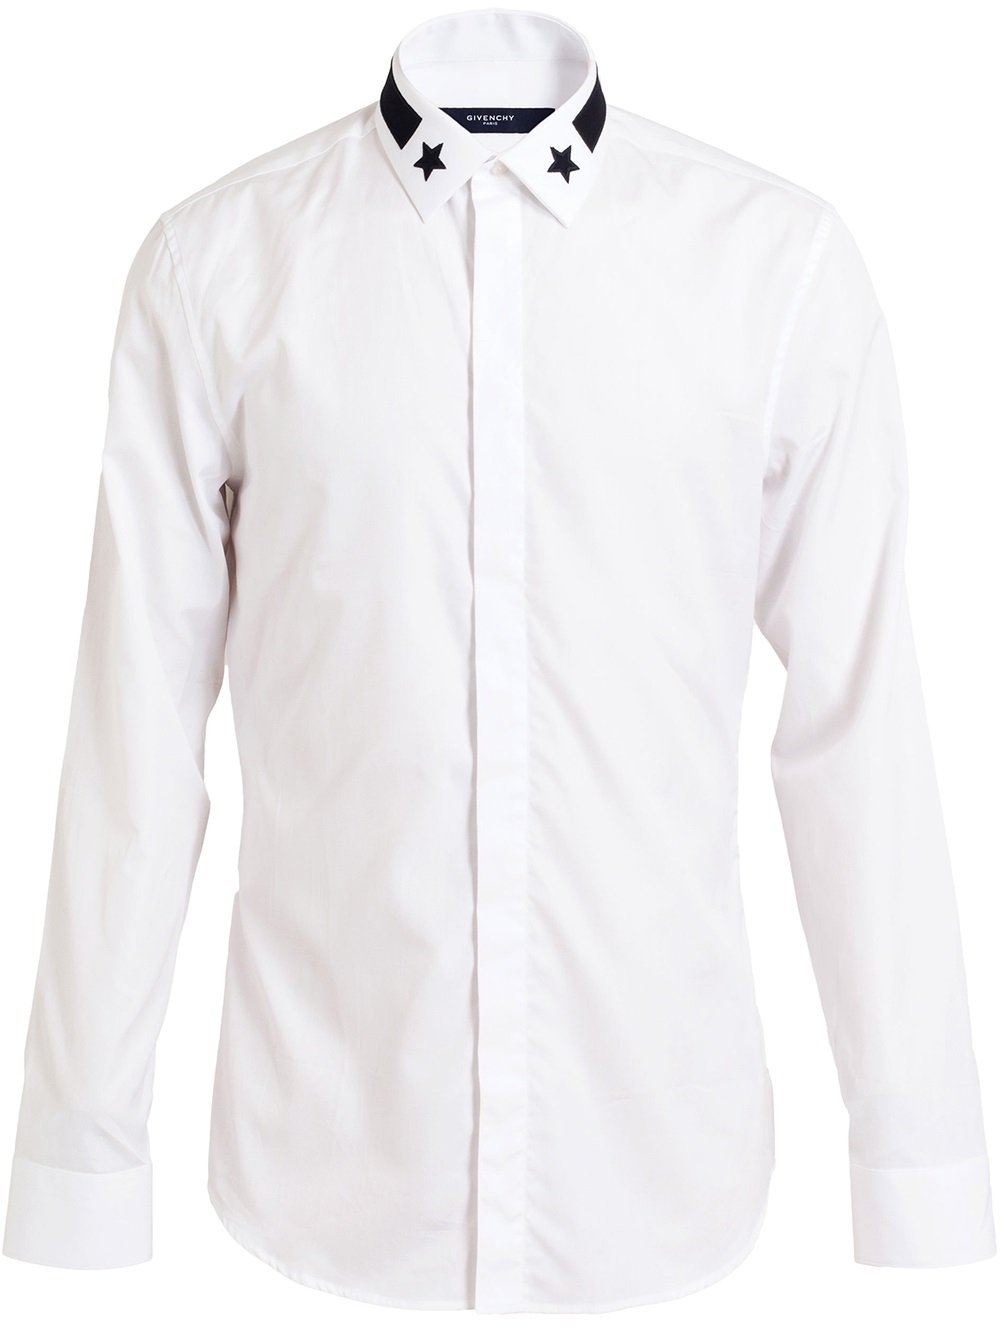 givenchy-white-star-embroidered-tailored-cotton-shirt-product-1-17327286-1-053456144-normal.jpeg